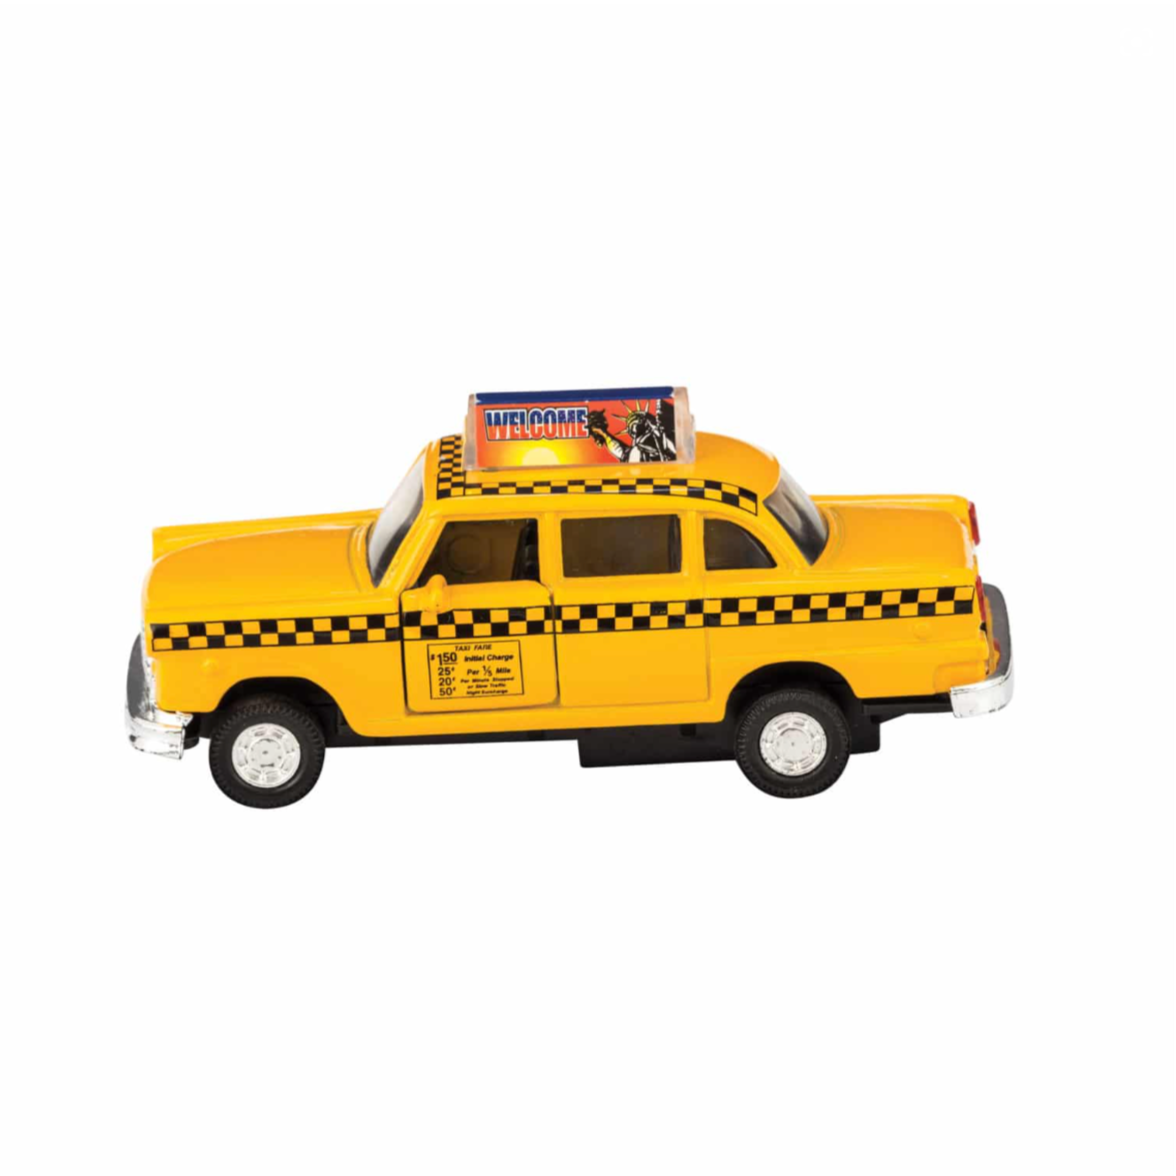 Diecast Taxi -pull-back